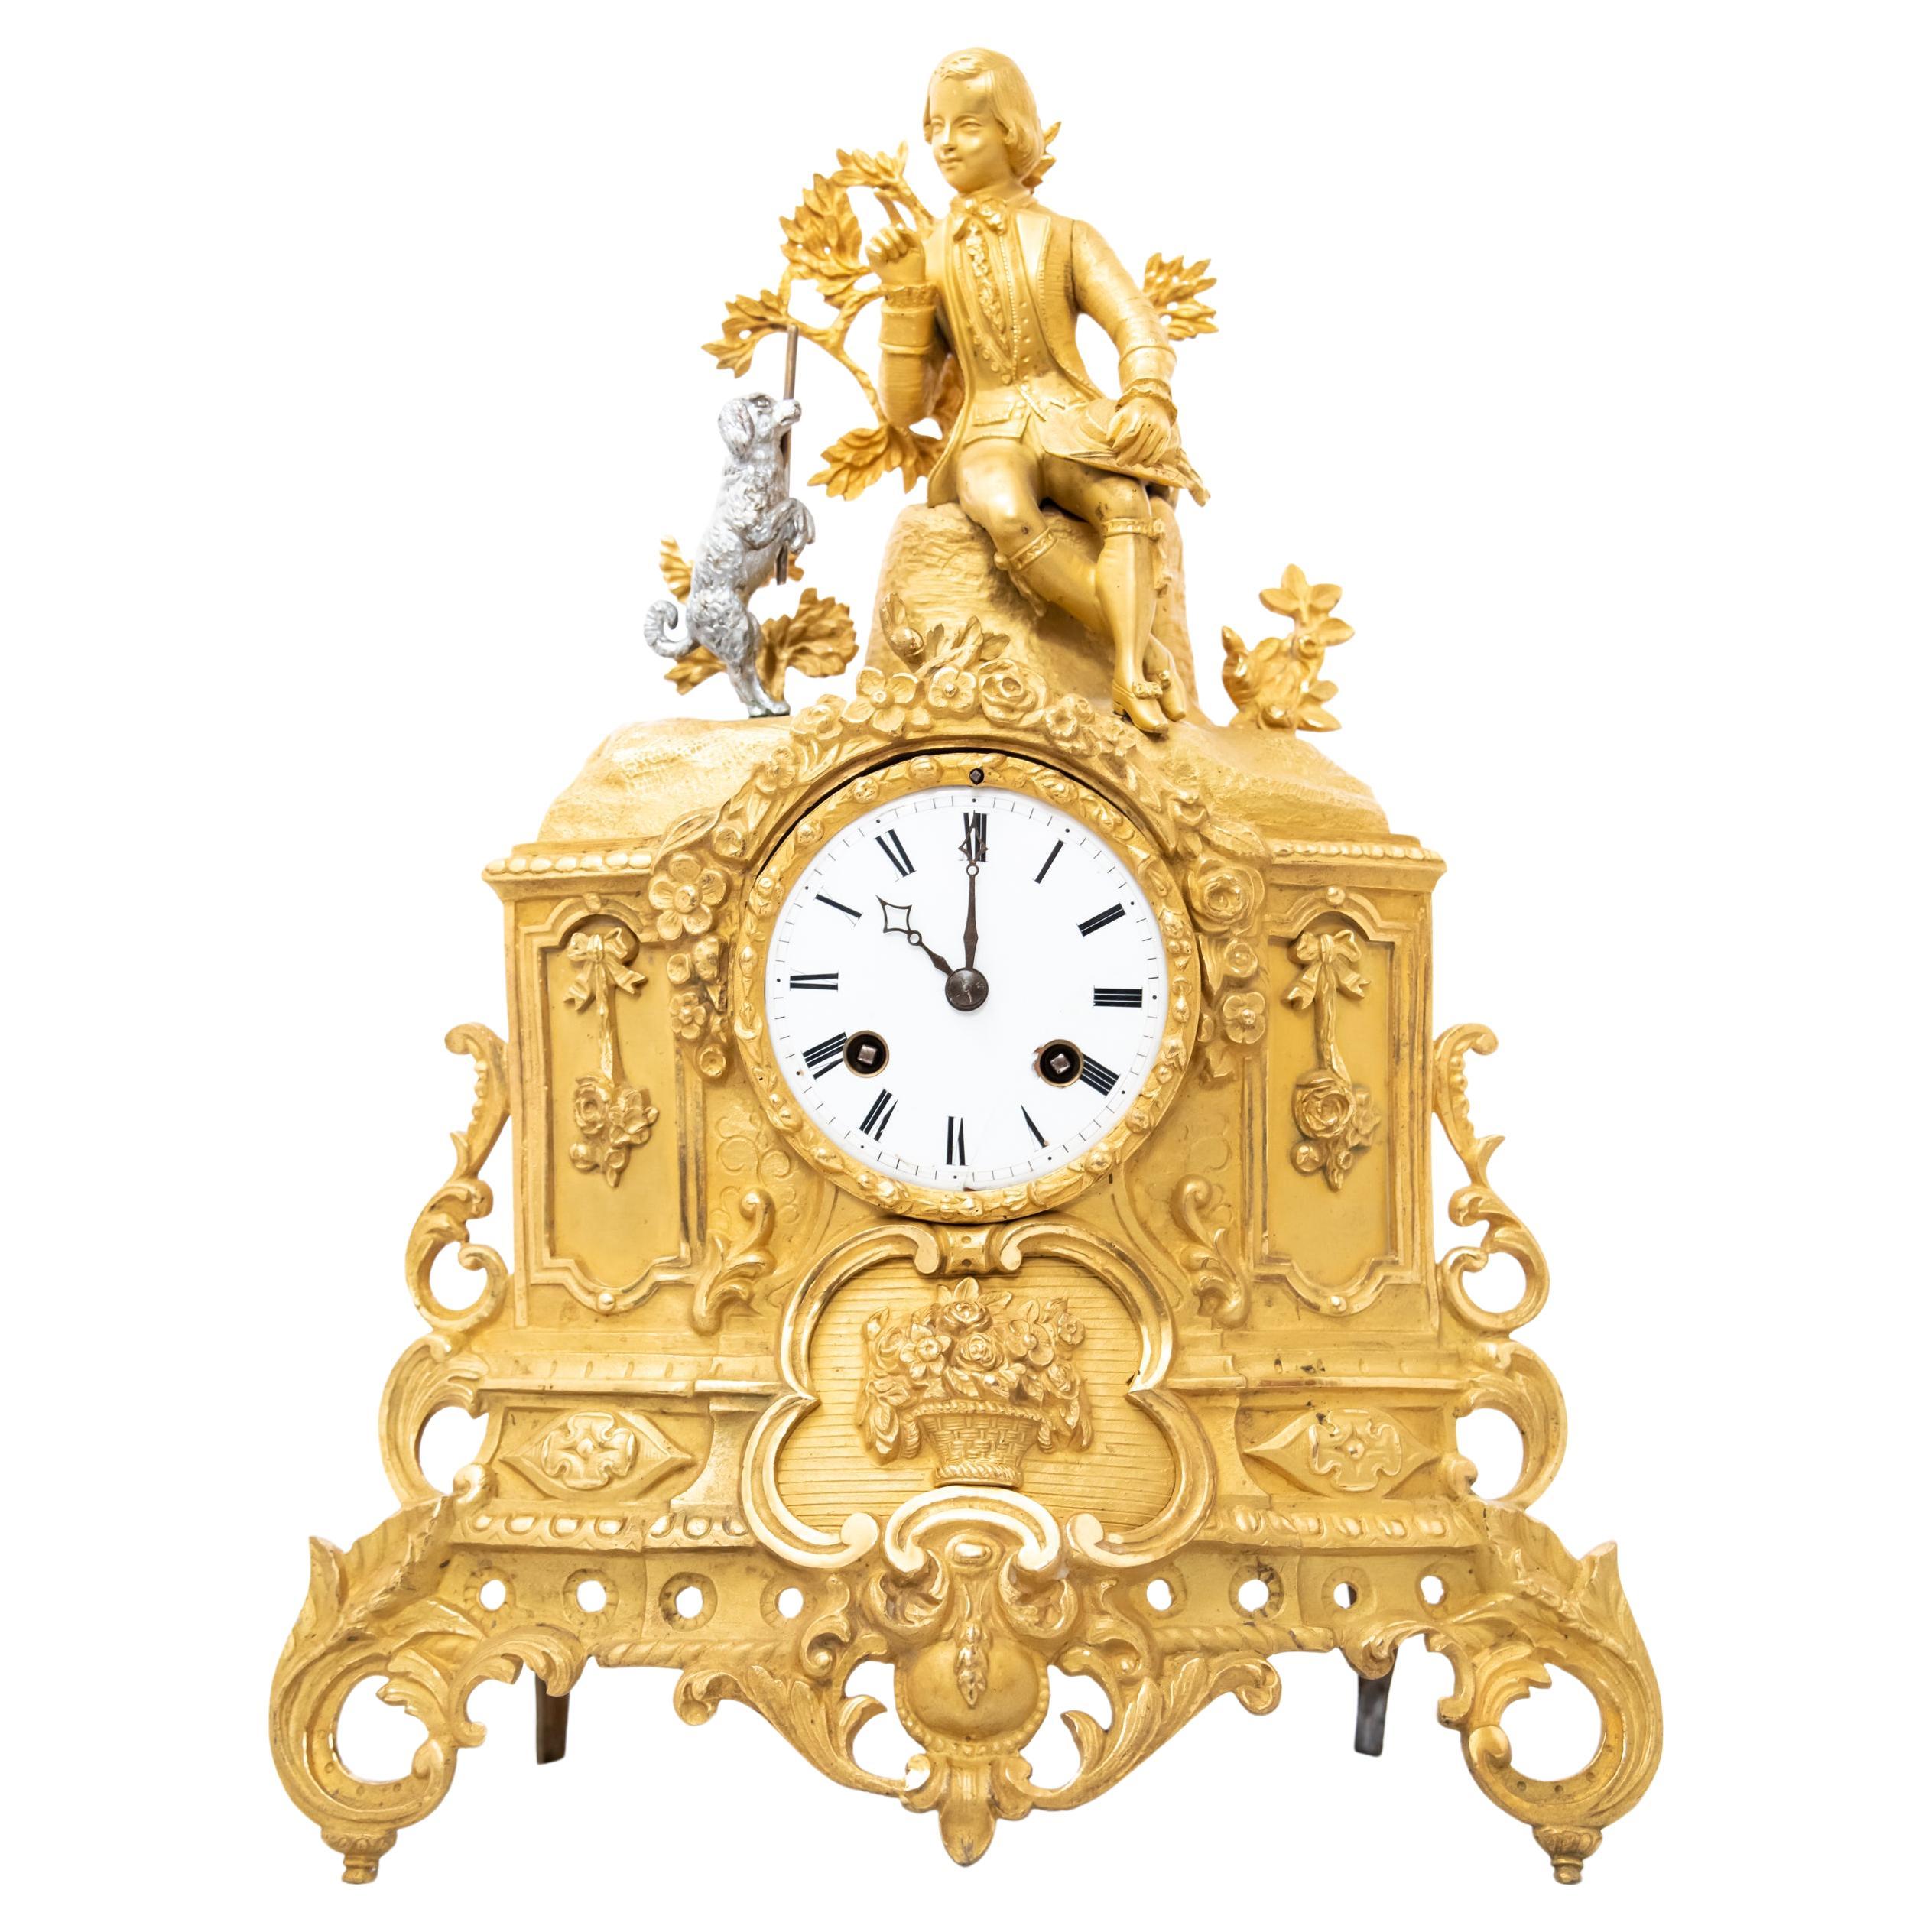 A Boy and His Dog, 19th Century French Fire-Gilt Bronze Clock For Sale